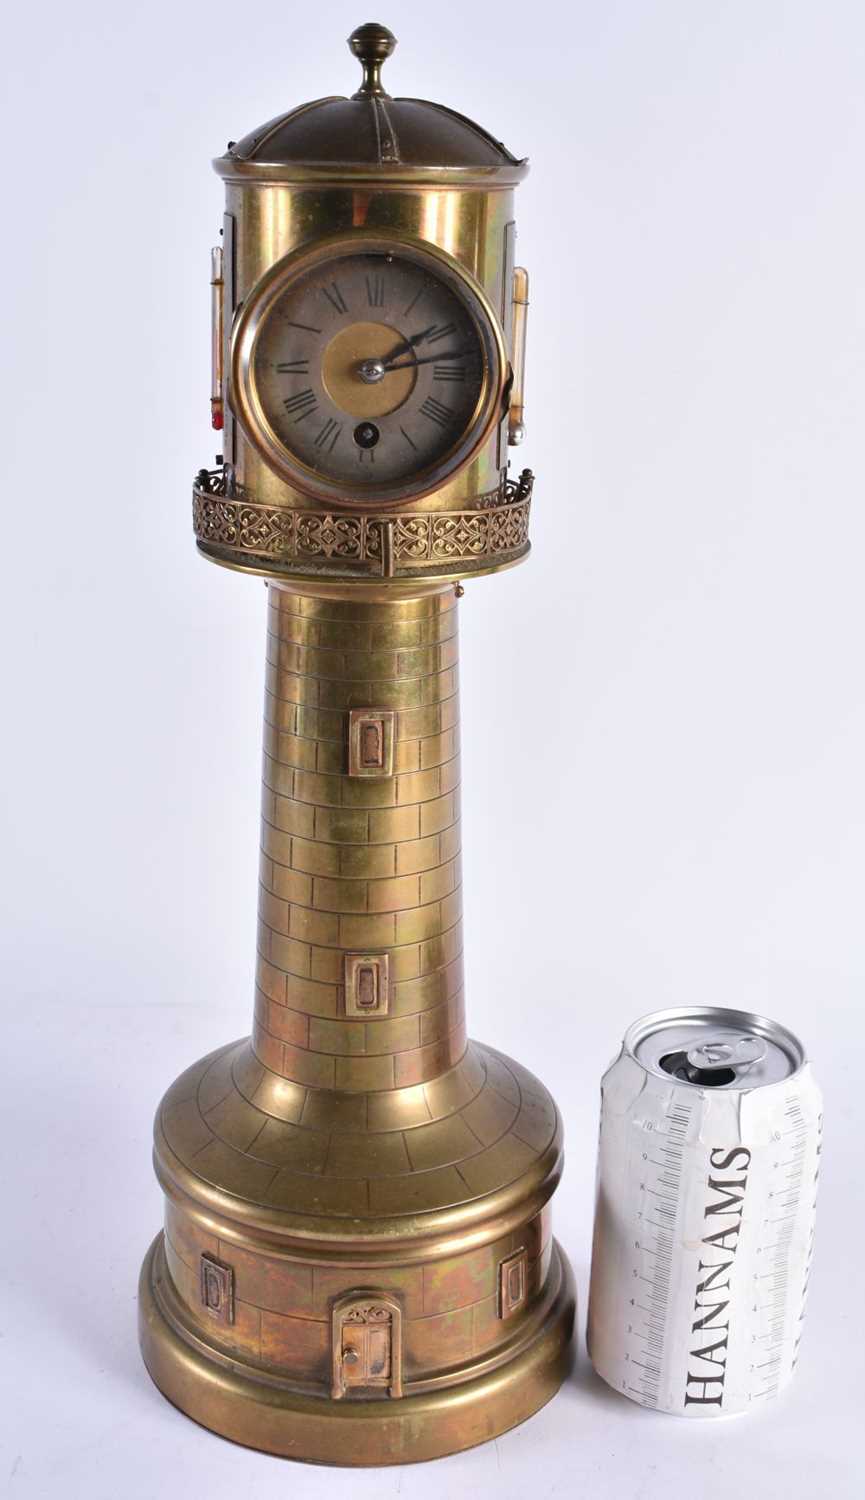 A LOVELY LARGE 19TH CENTURY GUILLEMET INDUSTIRAL BRONZE LIGHTHOUSE CLOCK formed with a silver